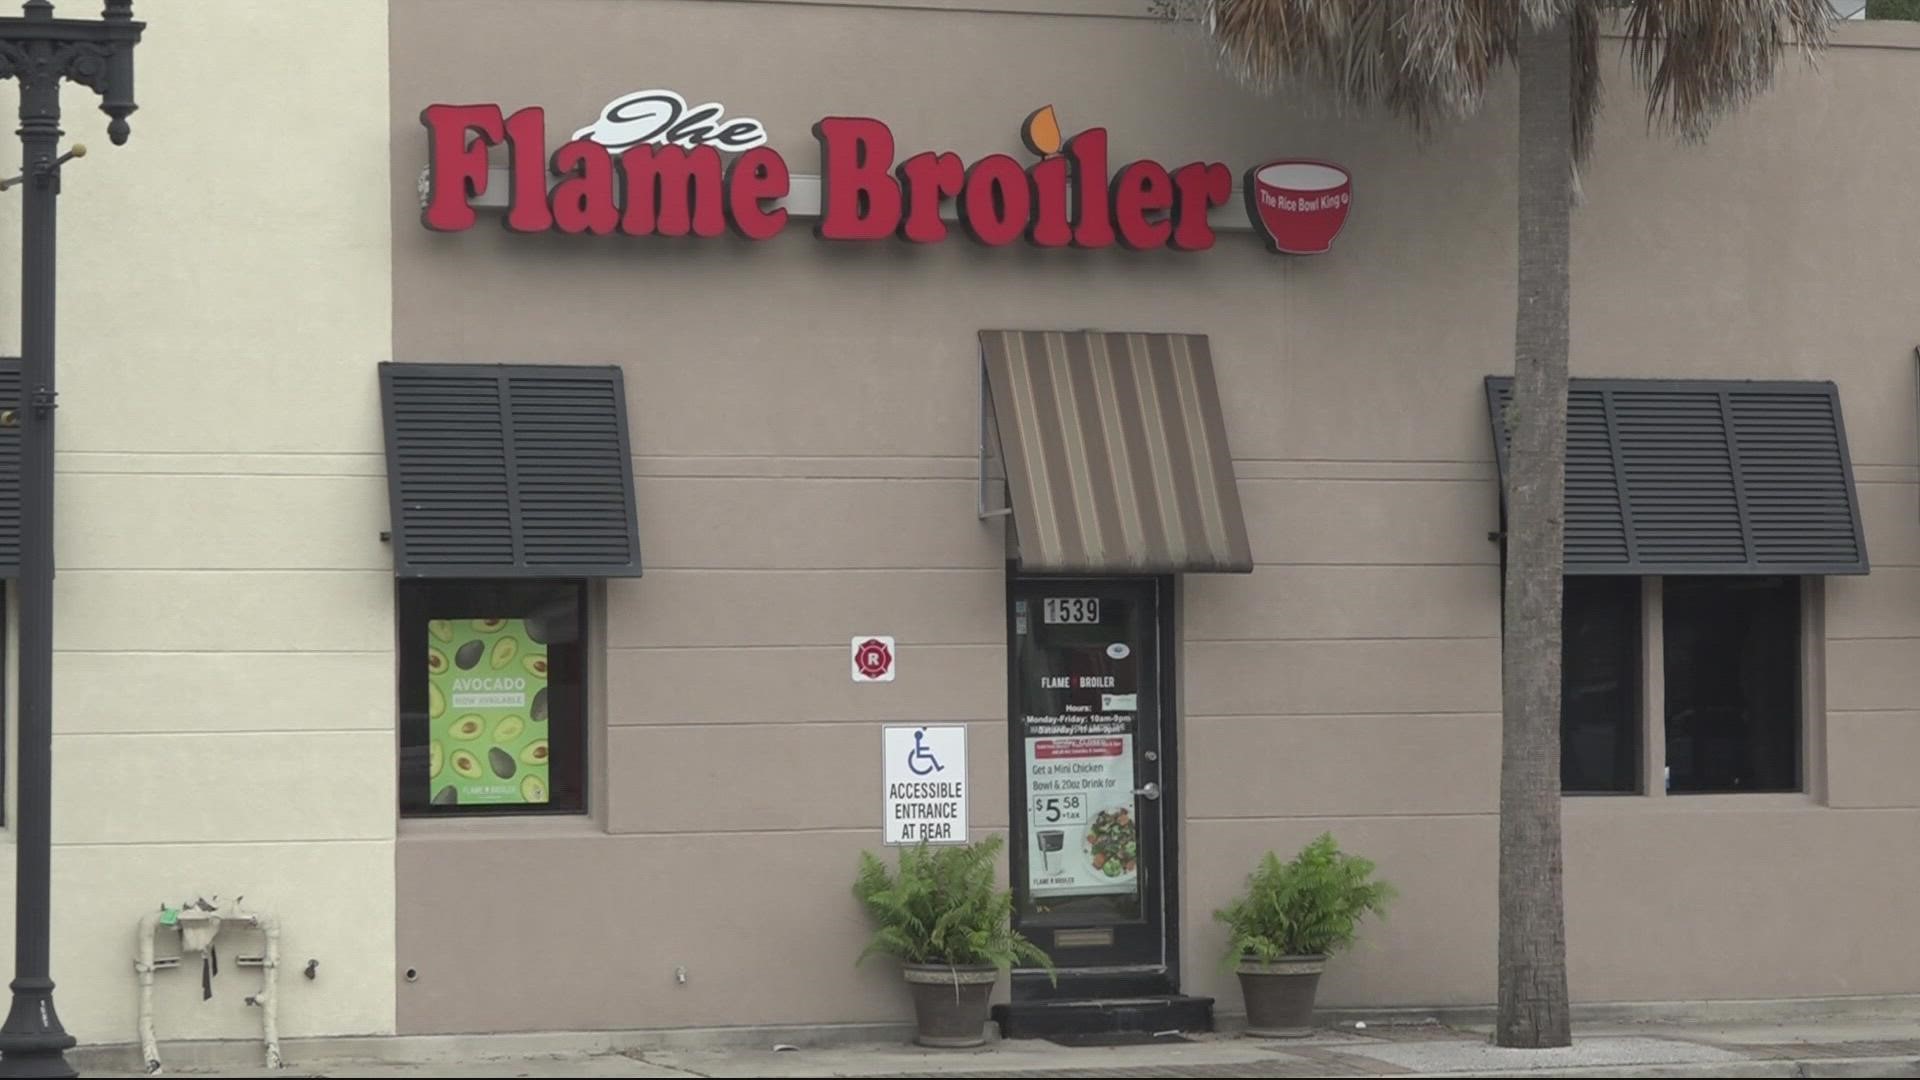 The manager of Flame Broiler has some things to keep in mind for future hurricanes.